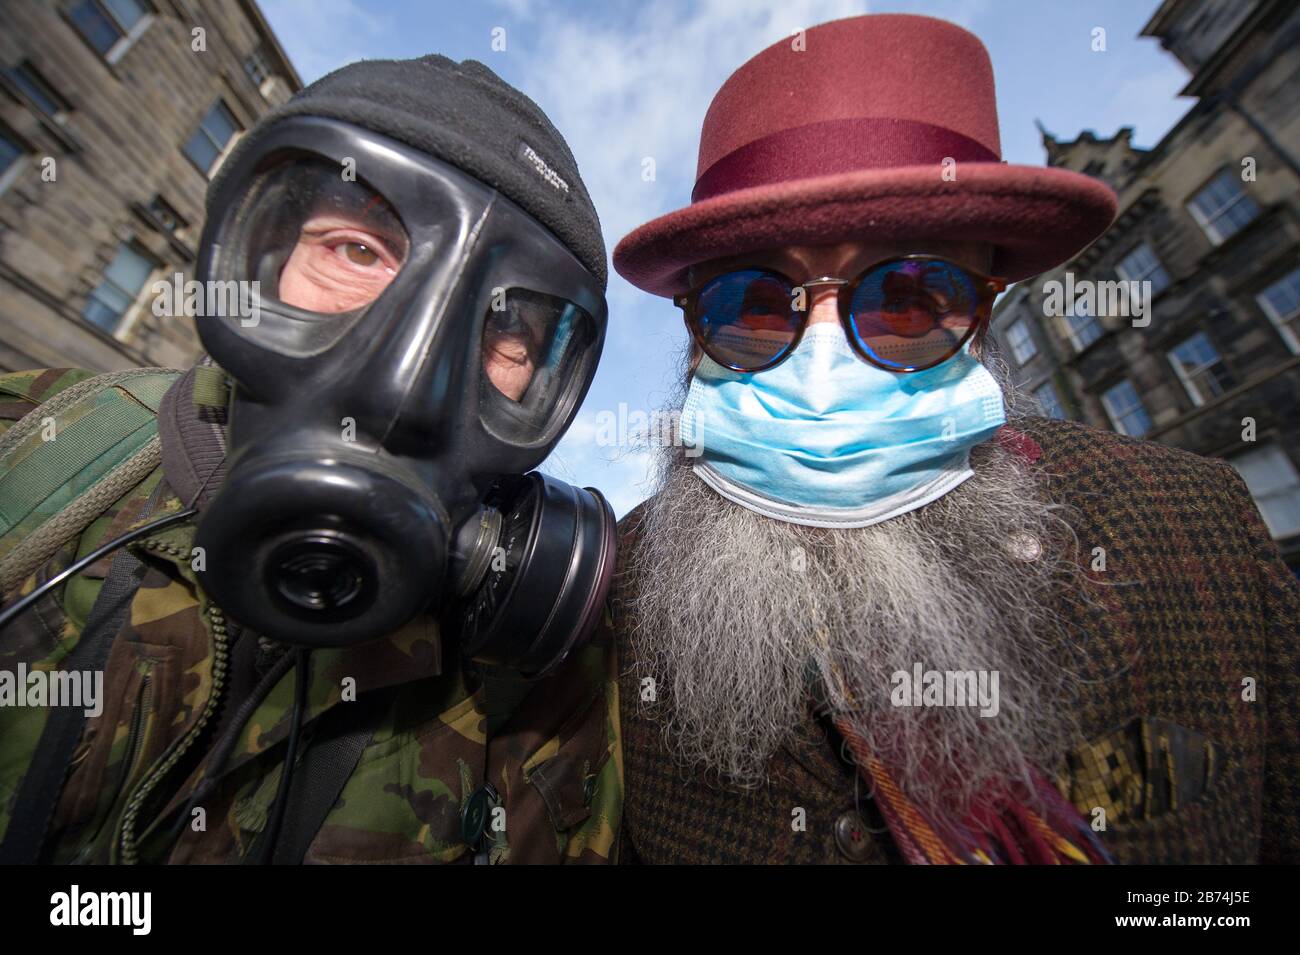 Edinburgh, UK. 13th Mar, 2020. Pictured: (left) Alan Wilson; (right), Jimmy Crombie, wearing personal protective equipment anticipating the ensuing pandemic which is about to hit Scotland. Credit: Colin Fisher/Alamy Live News Stock Photo